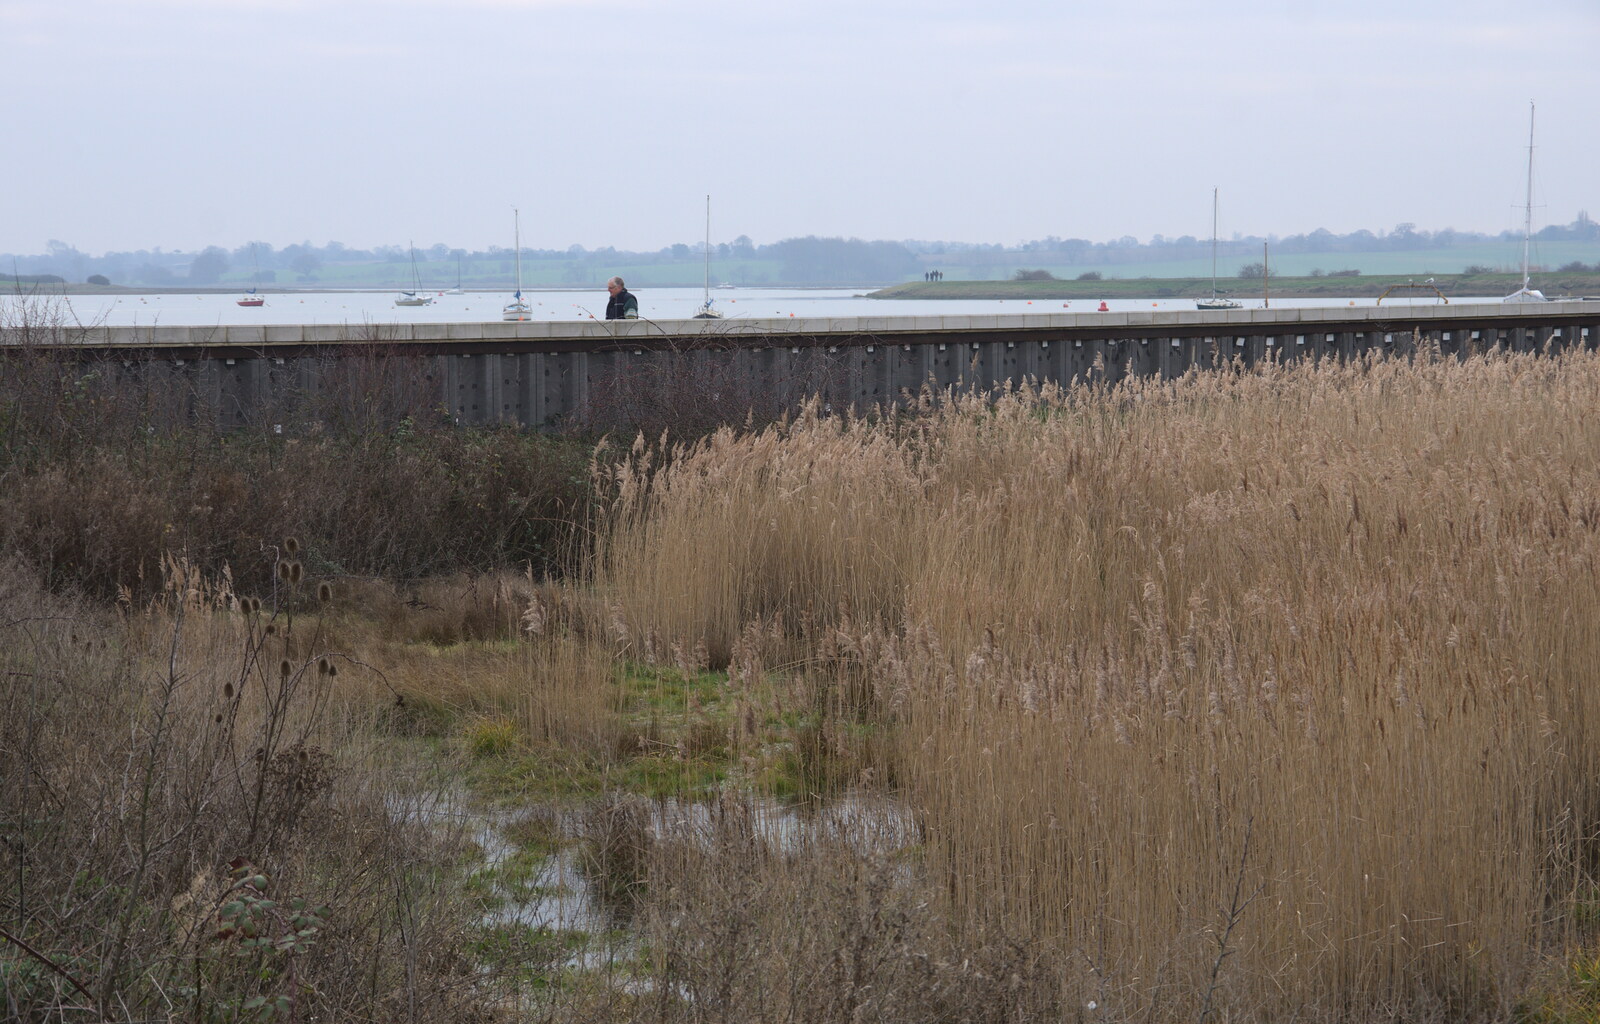 Some dude walks along the sea wall by the marshes from A Postcard From Woodbridge, Suffolk - 4th January 2019